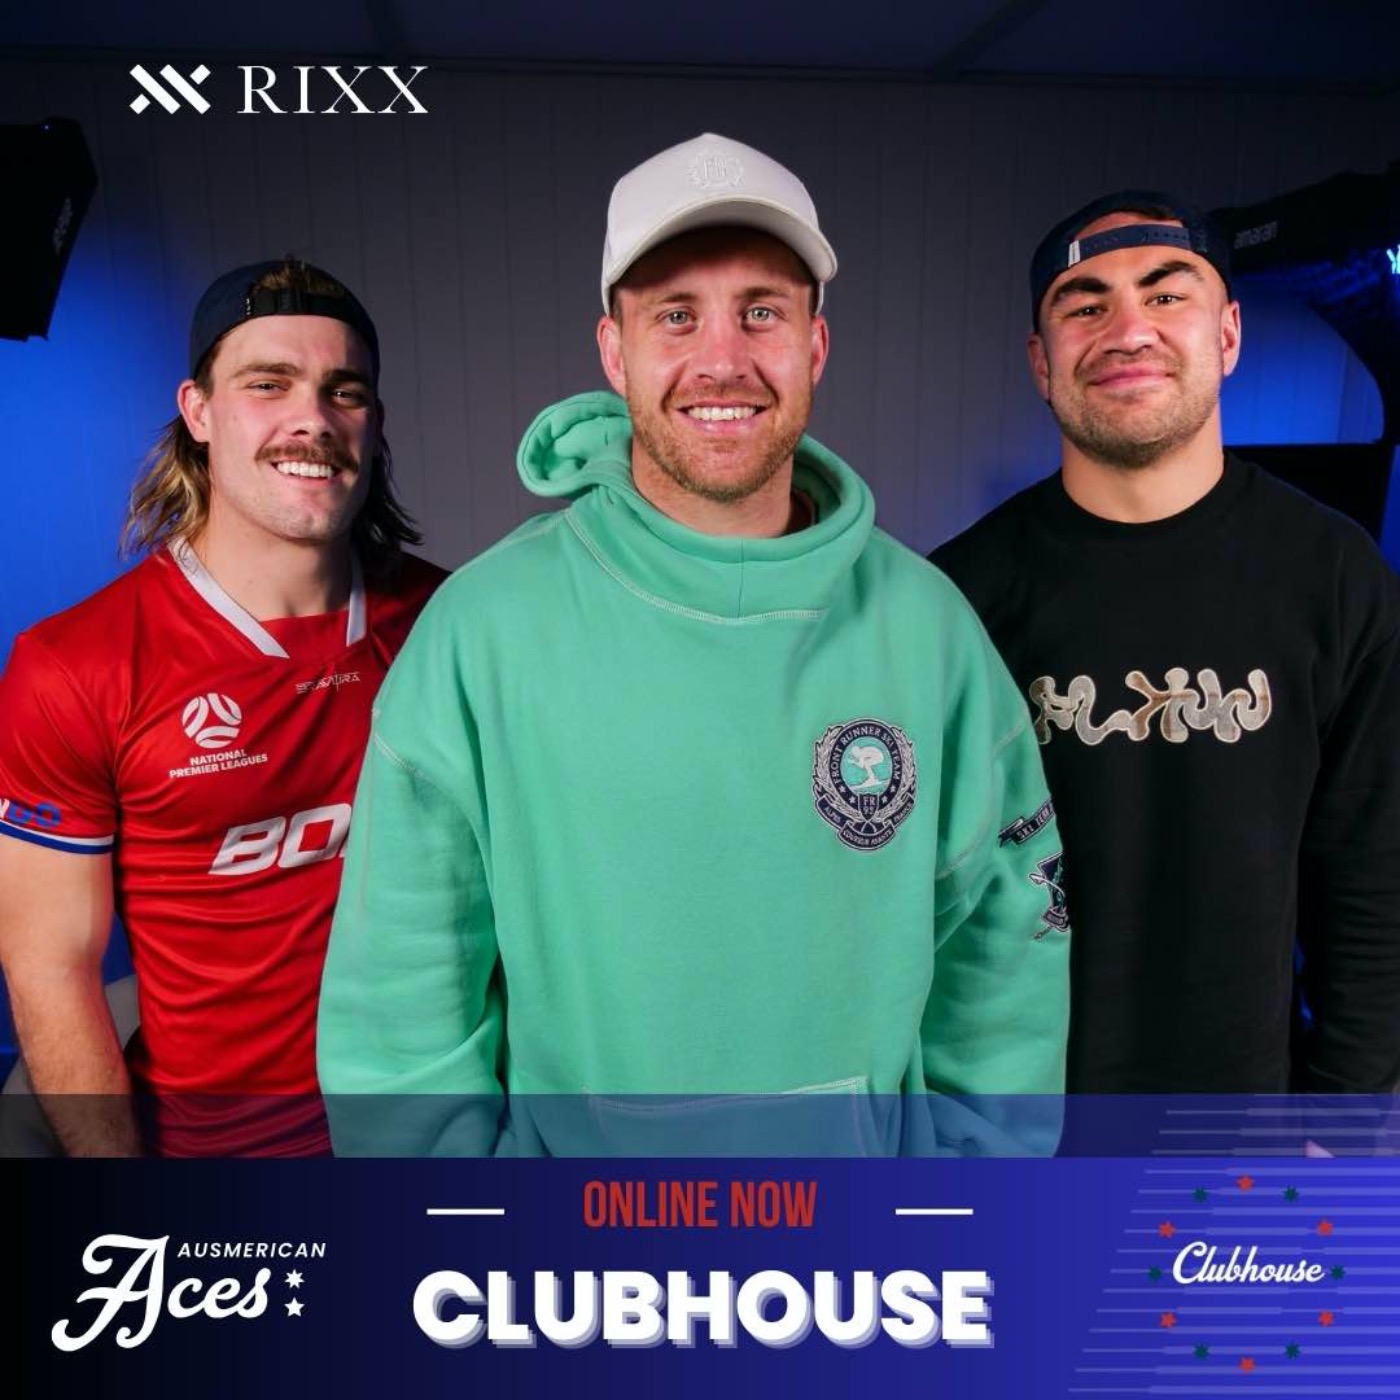 Clubhouse 🏠 Bellamy's smile, NSW & Possibly having someone return!